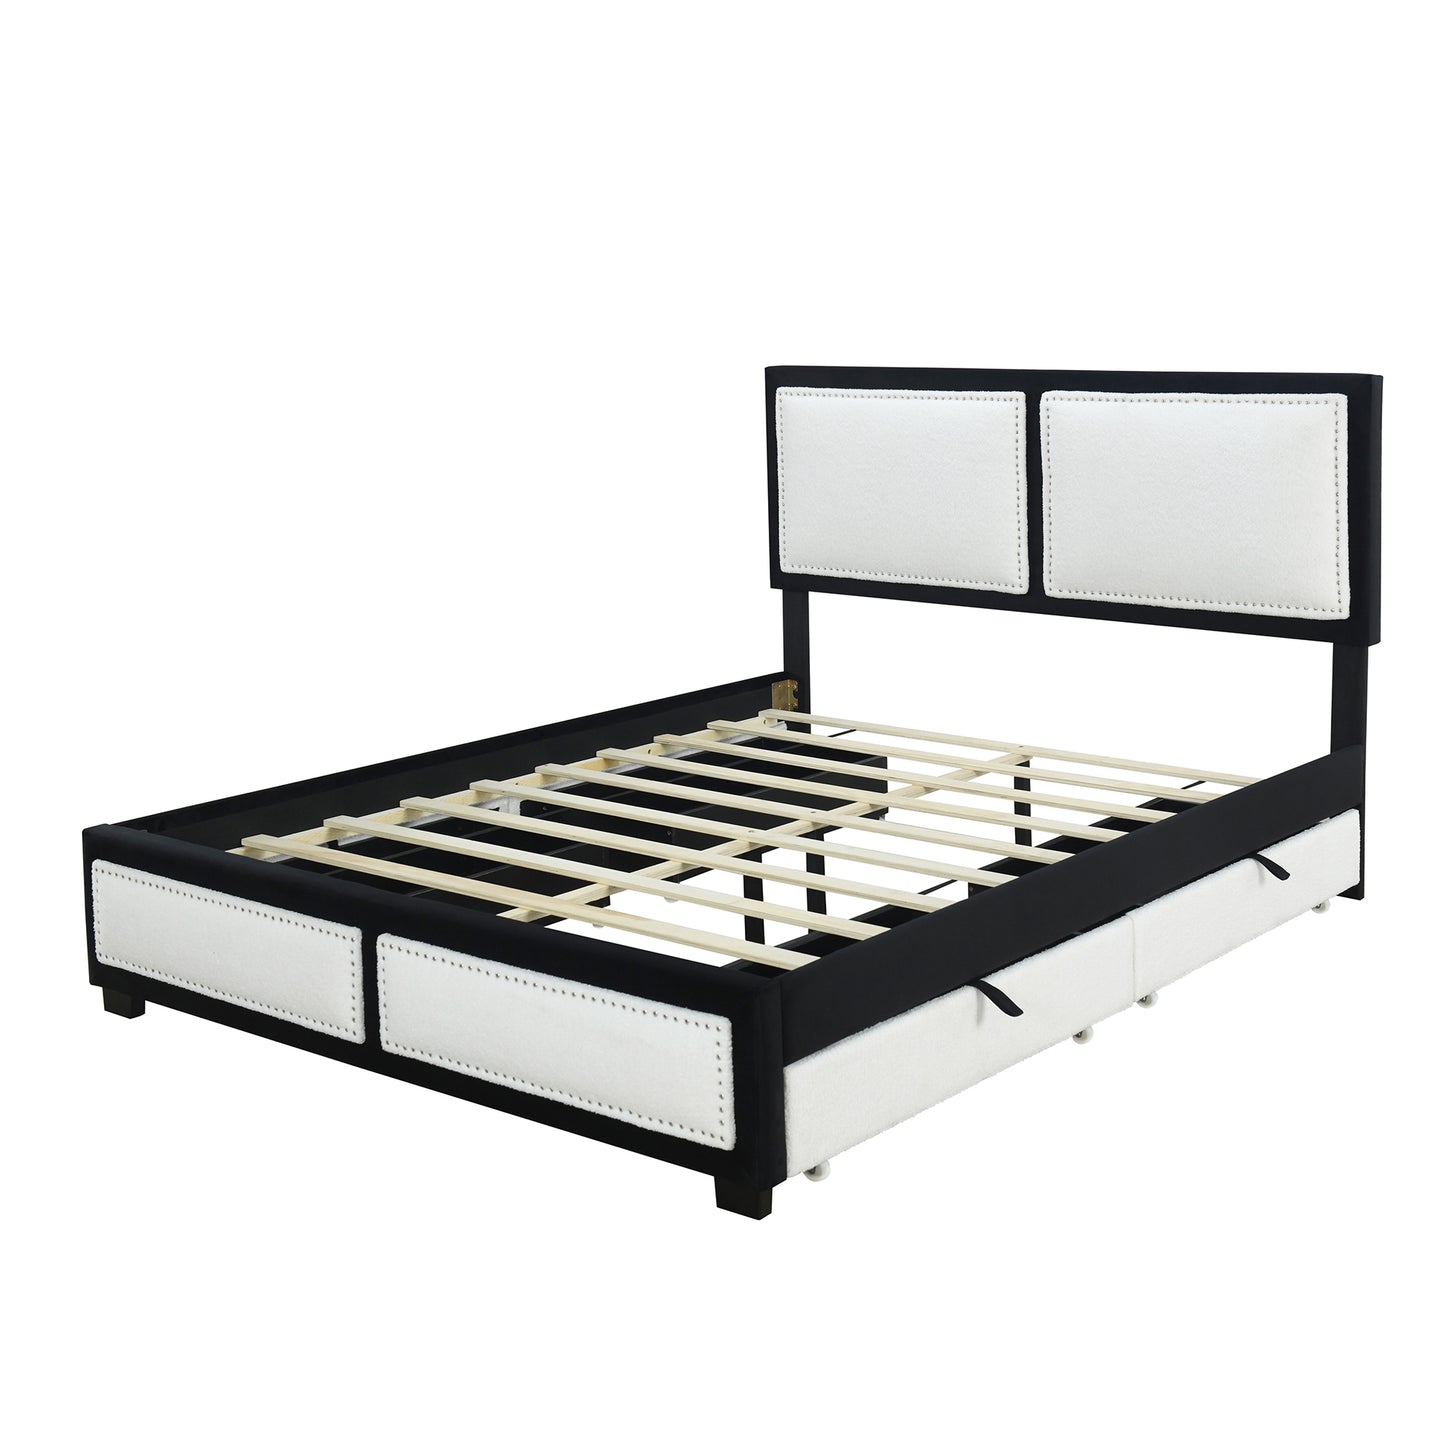 Queen Size Upholstered Platform Bed with Large Rivet-decorated Backrests and 4 Drawers, Velvet matched with Teddy Fleece, Black+White